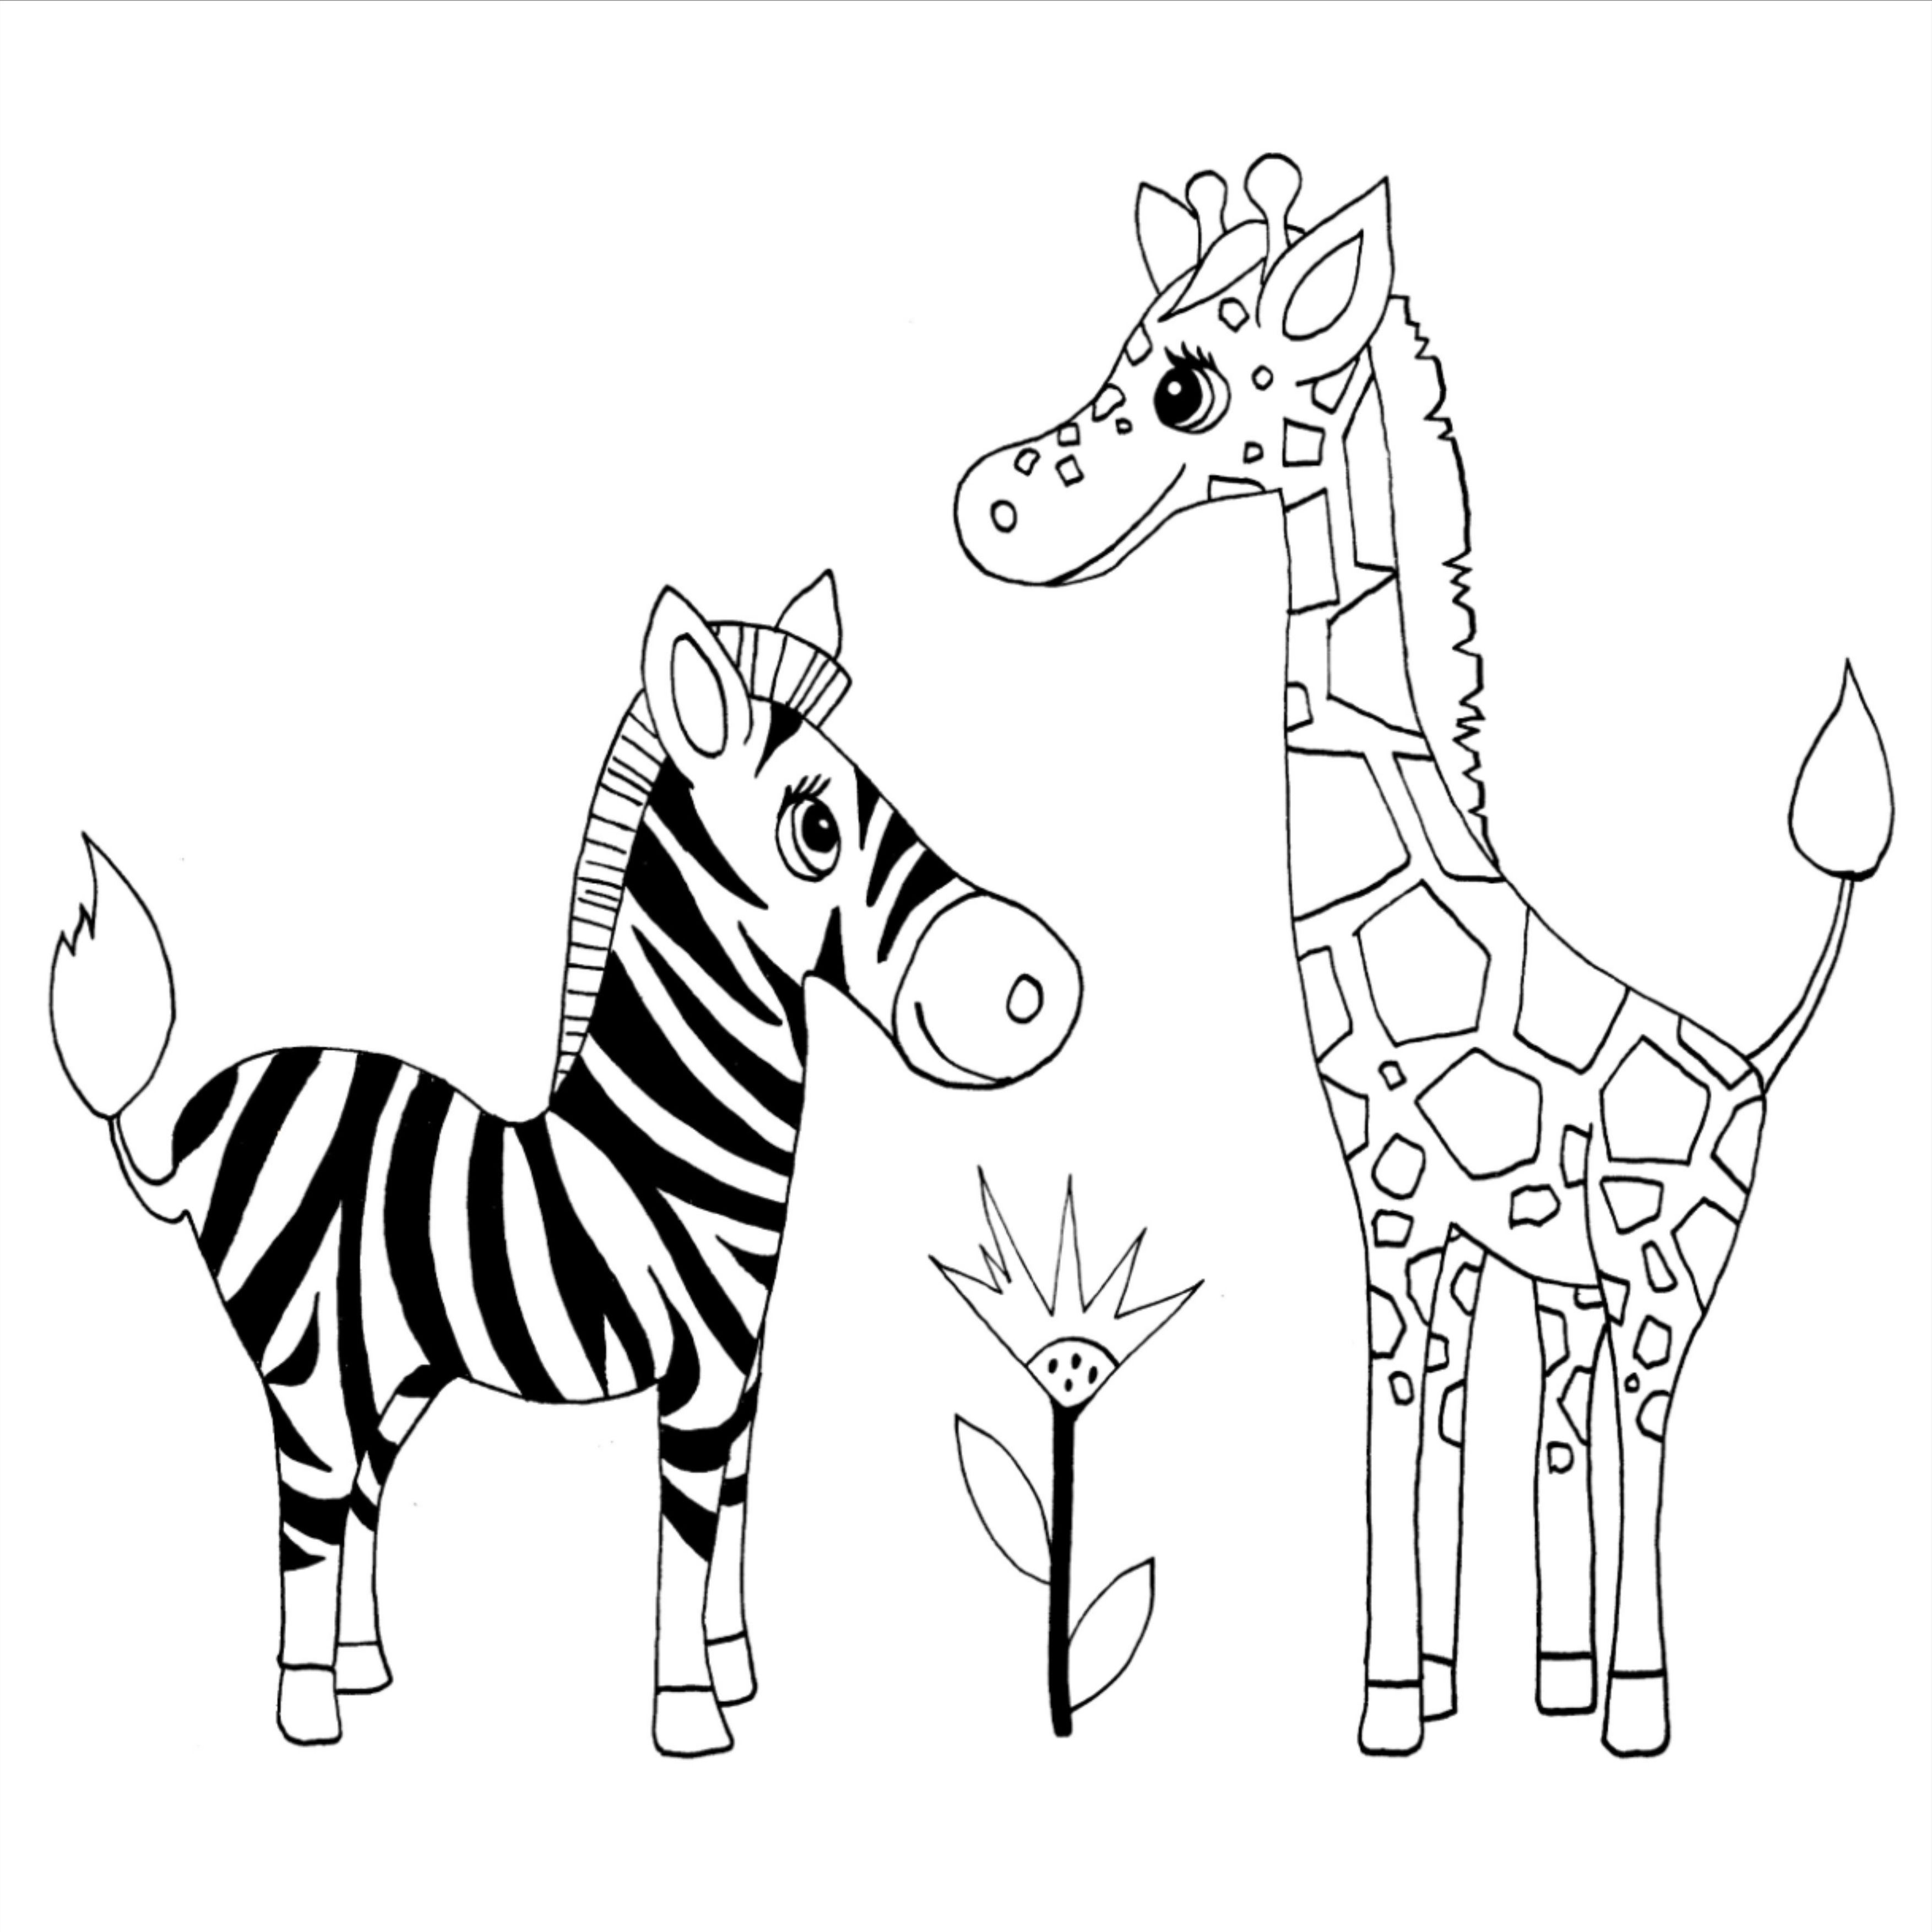 Outstanding zebra coloring book for 3-4 year olds